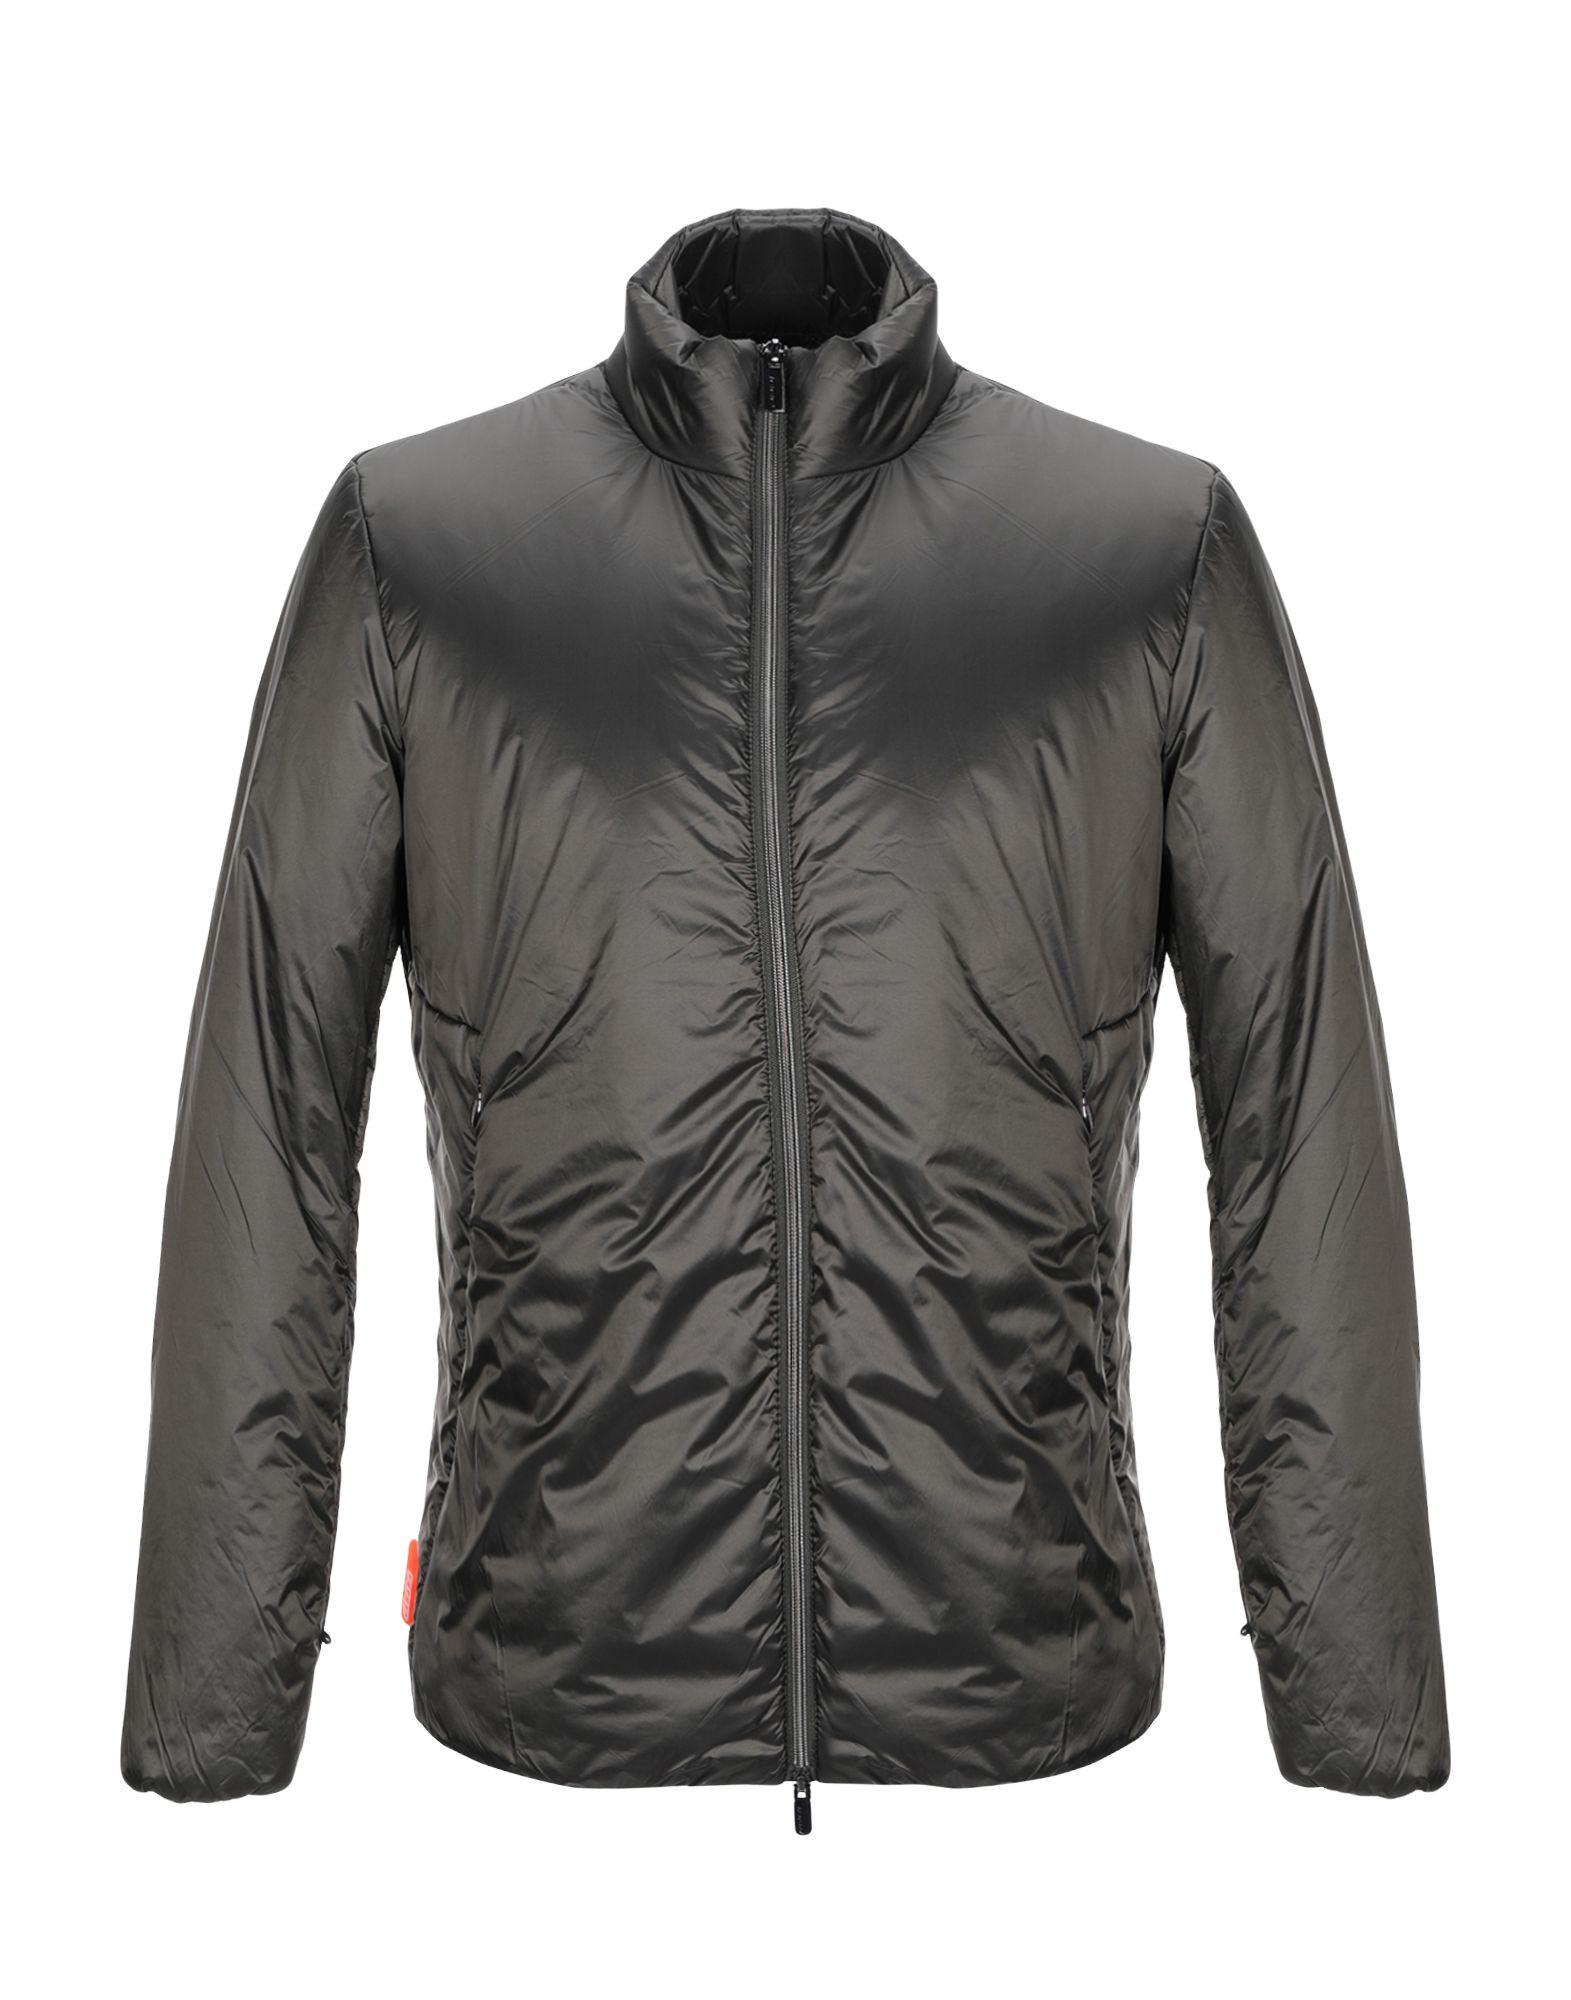 Rrd Synthetic Down Jacket in Gray for Men - Lyst